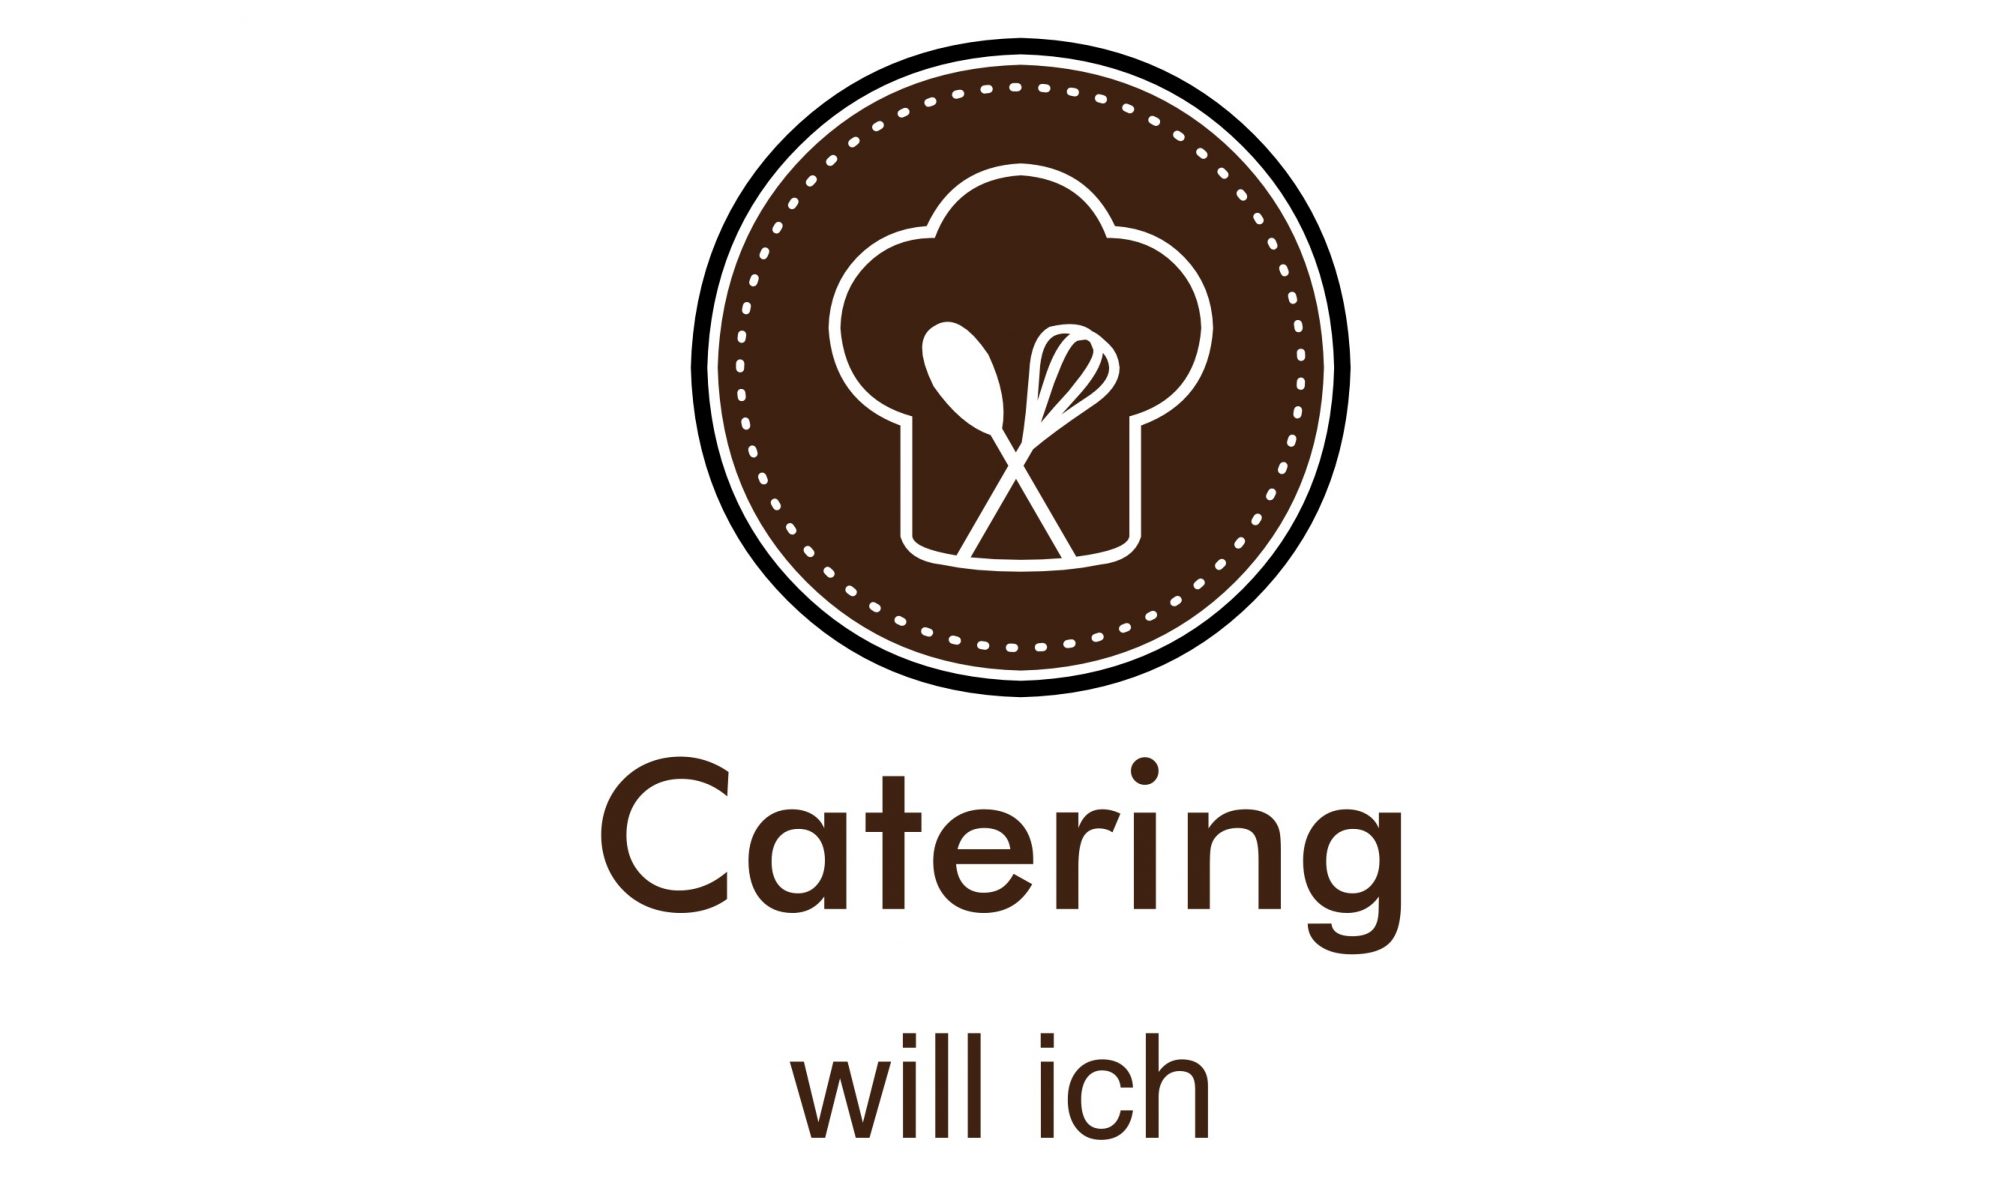 Catering will ich